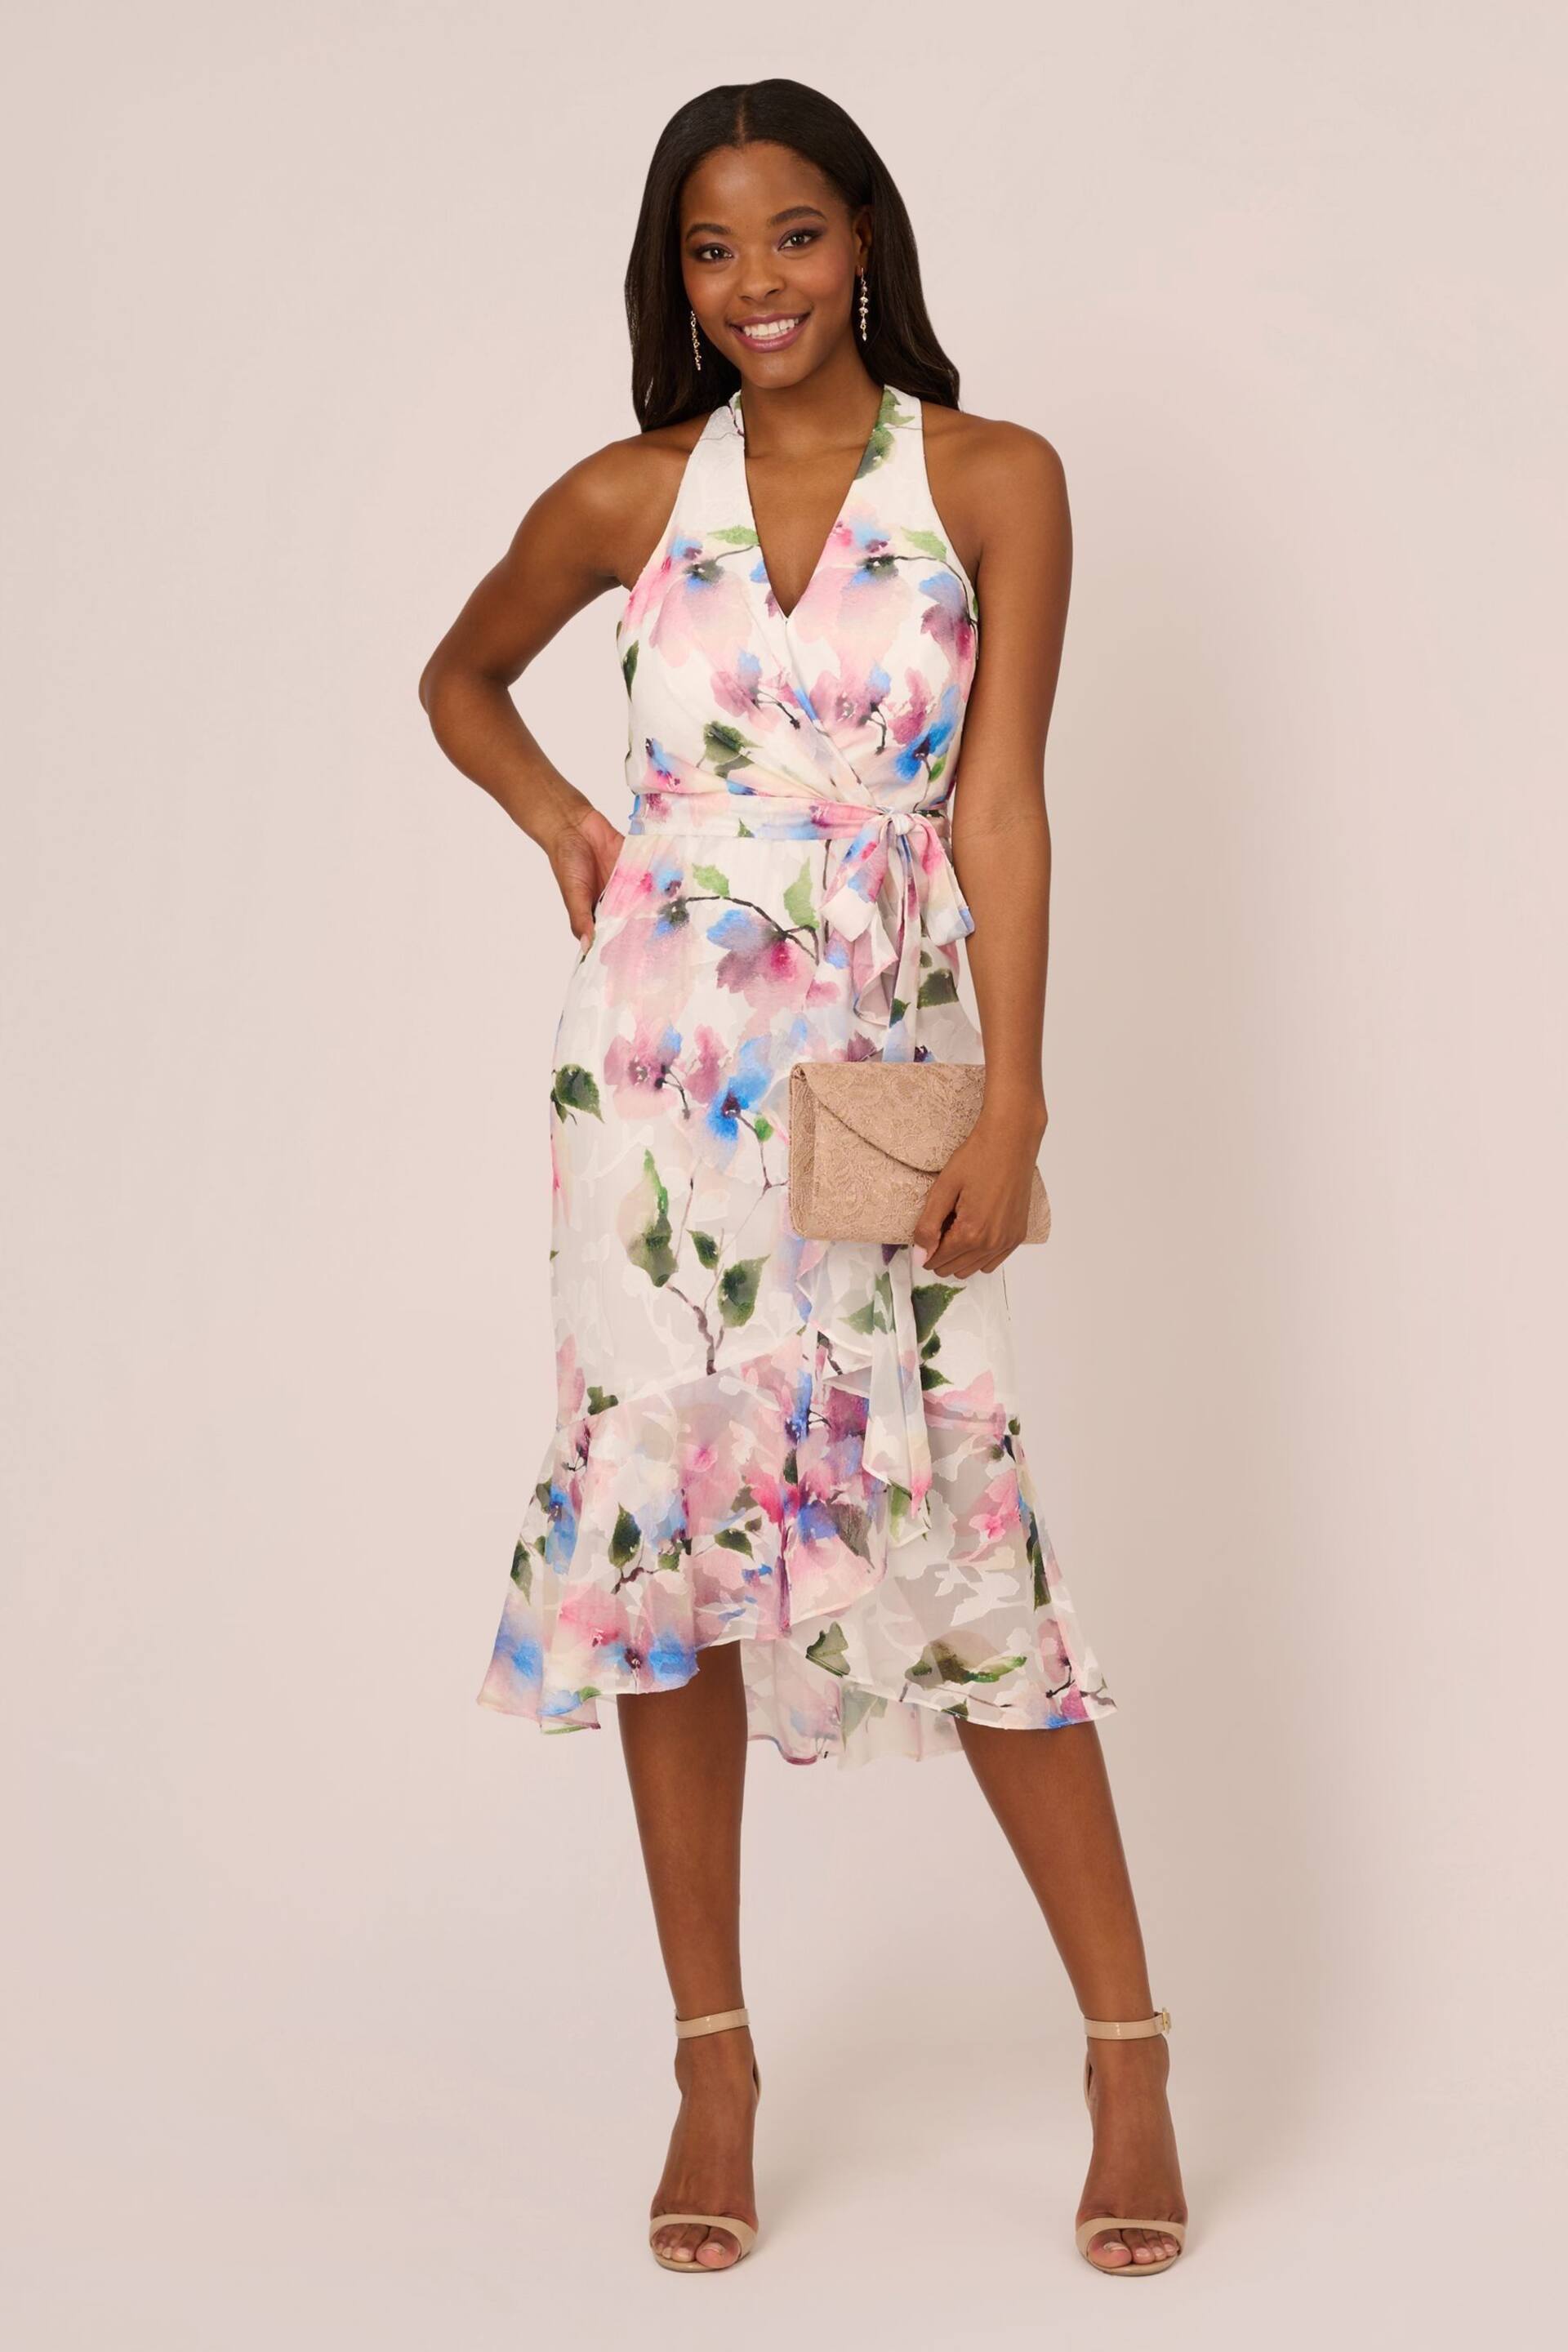 Adrianna Papell White Printed High-Low Dress - Image 3 of 7